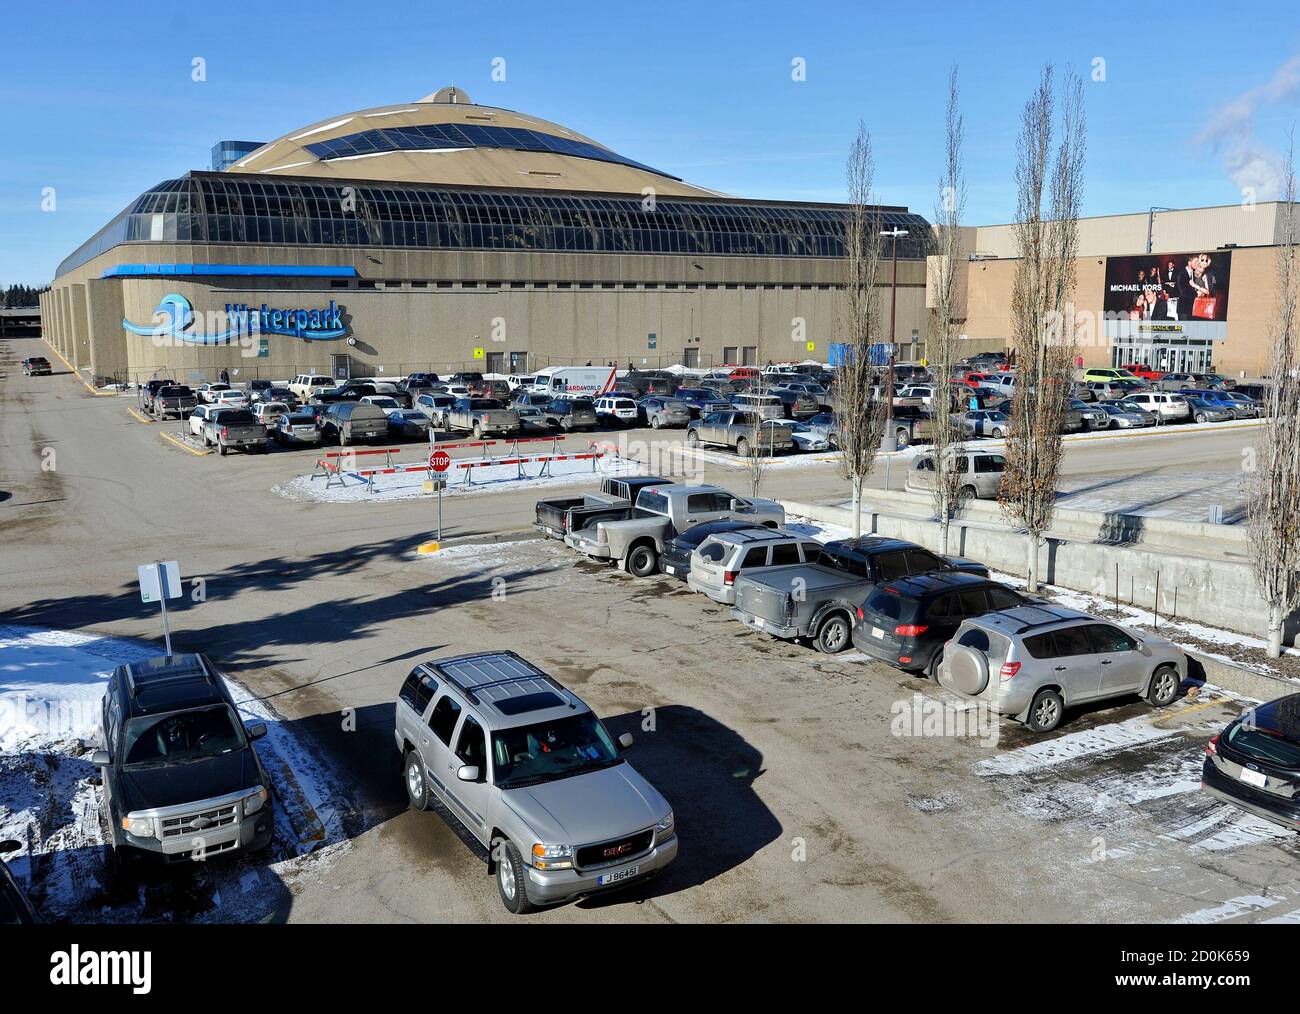 A Parking Lot And Waterpark Are Seen At The West Edmonton Mall In Edmonton February 22 15 U S Homeland Security Secretary Jeh Johnson Said On Sunday He Takes Seriously An Apparent Threat